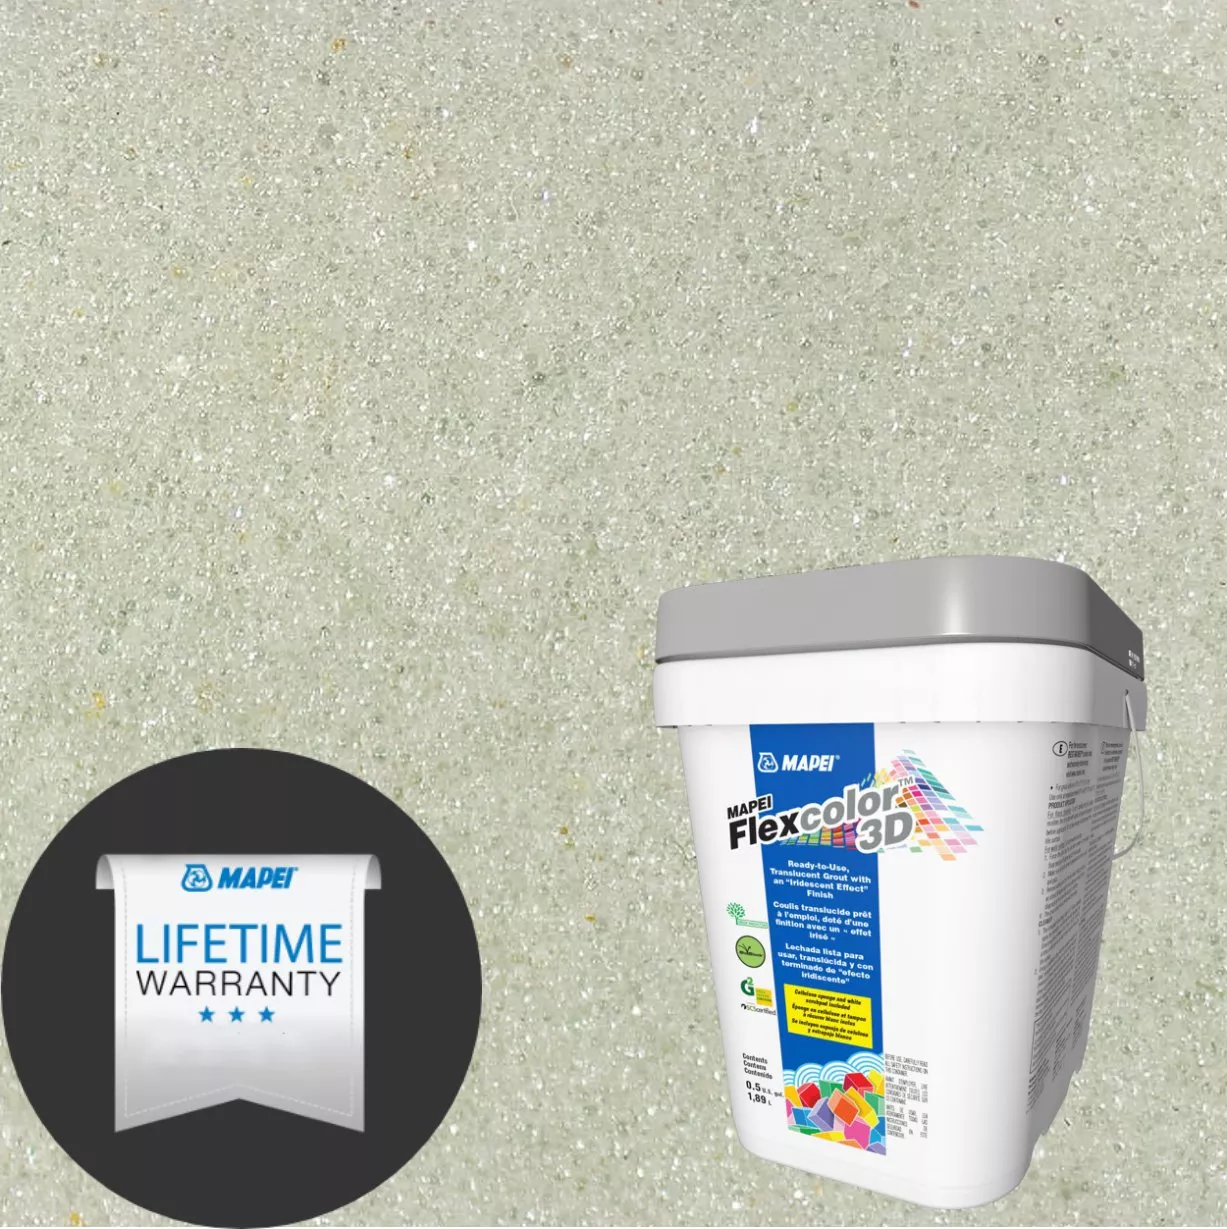 Mapei 201 Crystal Moon FlexColor 3D Pre-Mixed Grout